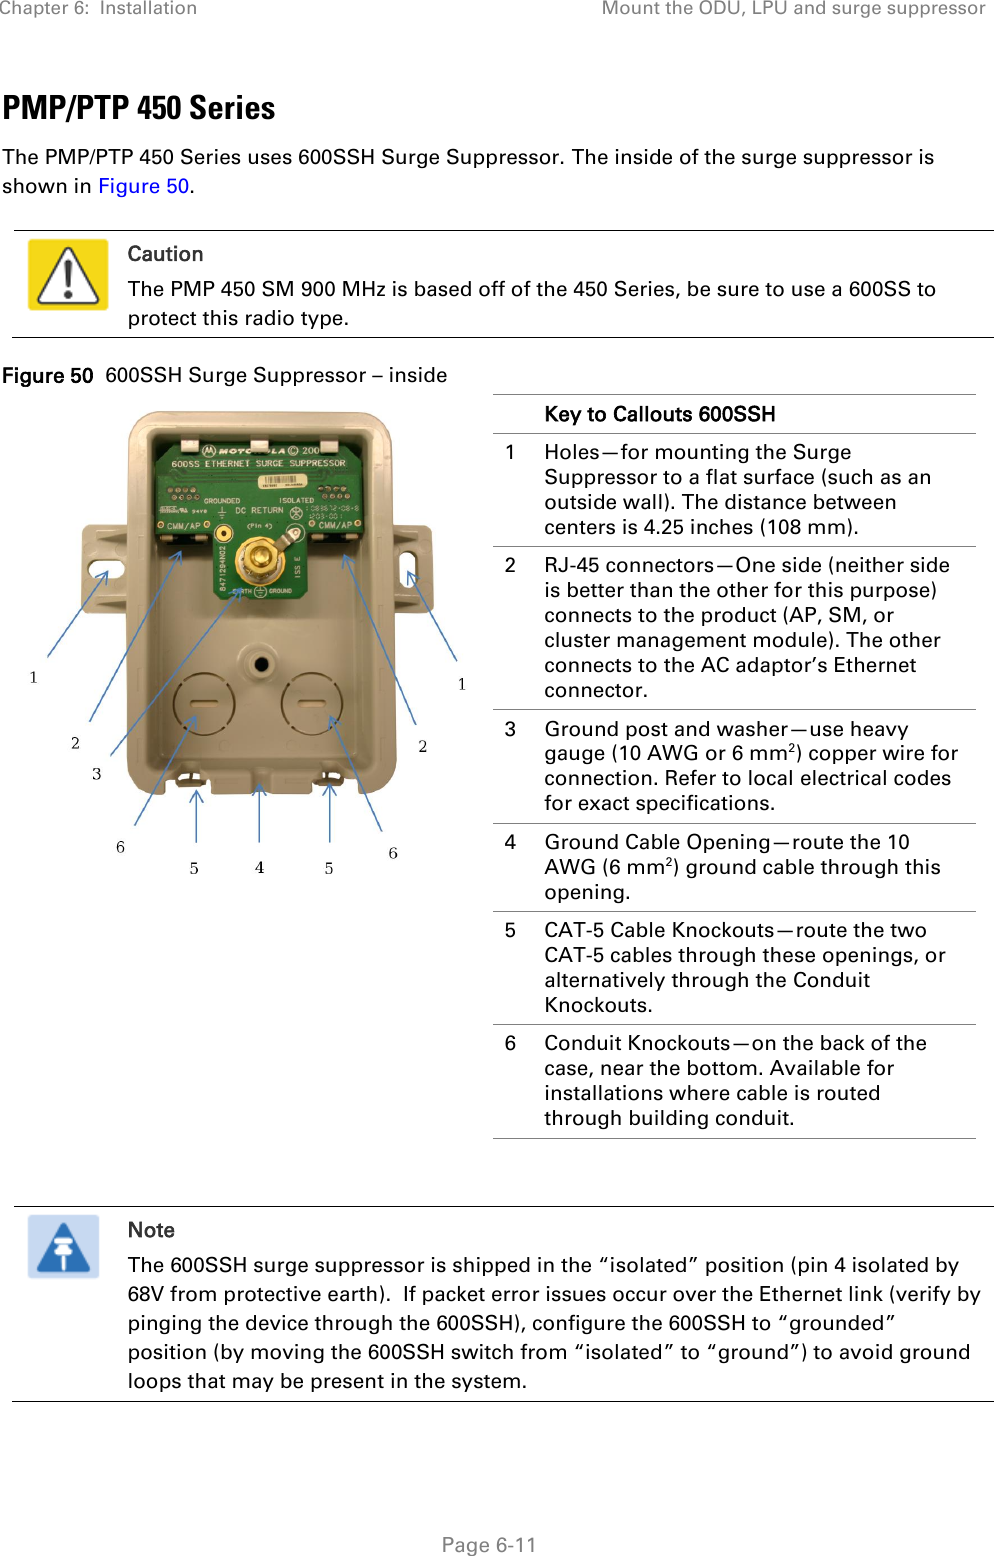 Chapter 6:  Installation Mount the ODU, LPU and surge suppressor   Page 6-11 PMP/PTP 450 Series The PMP/PTP 450 Series uses 600SSH Surge Suppressor. The inside of the surge suppressor is shown in Figure 50.   Caution The PMP 450 SM 900 MHz is based off of the 450 Series, be sure to use a 600SS to protect this radio type. Figure 50  600SSH Surge Suppressor – inside    Key to Callouts 600SSH 1 Holes—for mounting the Surge Suppressor to a flat surface (such as an outside wall). The distance between centers is 4.25 inches (108 mm). 2 RJ-45 connectors—One side (neither side is better than the other for this purpose) connects to the product (AP, SM, or cluster management module). The other connects to the AC adaptor’s Ethernet connector. 3 Ground post and washer—use heavy gauge (10 AWG or 6 mm2) copper wire for connection. Refer to local electrical codes for exact specifications. 4 Ground Cable Opening—route the 10 AWG (6 mm2) ground cable through this opening. 5 CAT-5 Cable Knockouts—route the two CAT-5 cables through these openings, or alternatively through the Conduit Knockouts. 6 Conduit Knockouts—on the back of the case, near the bottom. Available for installations where cable is routed through building conduit.    Note The 600SSH surge suppressor is shipped in the “isolated” position (pin 4 isolated by 68V from protective earth).  If packet error issues occur over the Ethernet link (verify by pinging the device through the 600SSH), configure the 600SSH to “grounded” position (by moving the 600SSH switch from “isolated” to “ground”) to avoid ground loops that may be present in the system.  